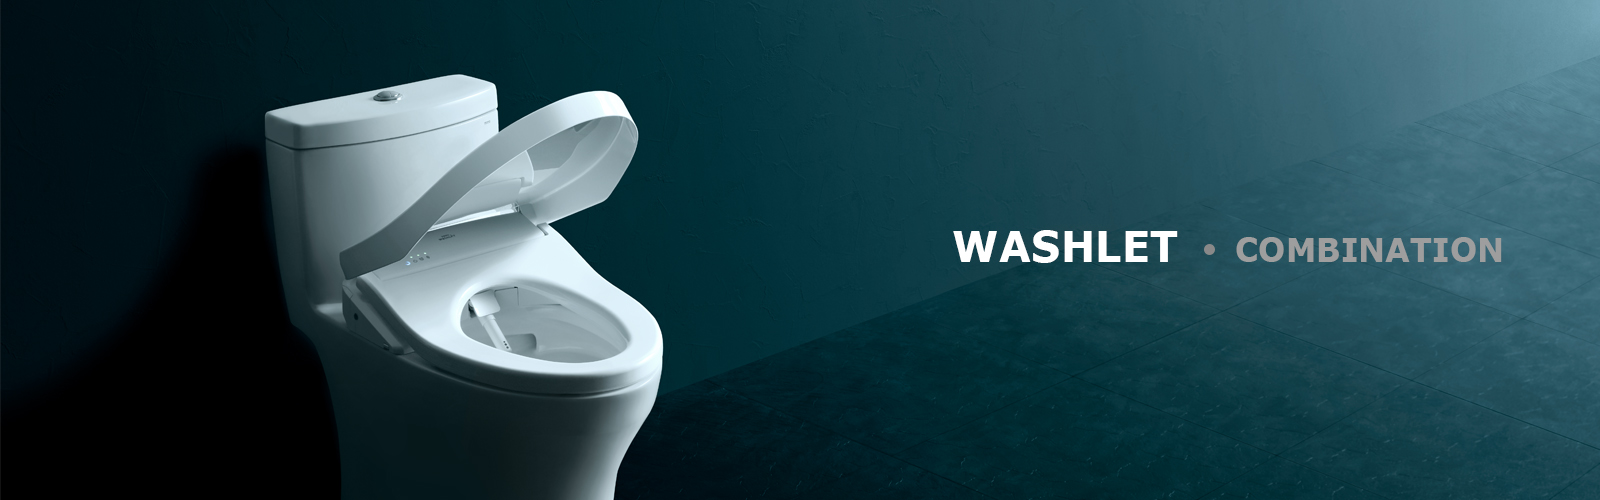 TOTO - PRODUCTS>WASHLET>COMBINATION